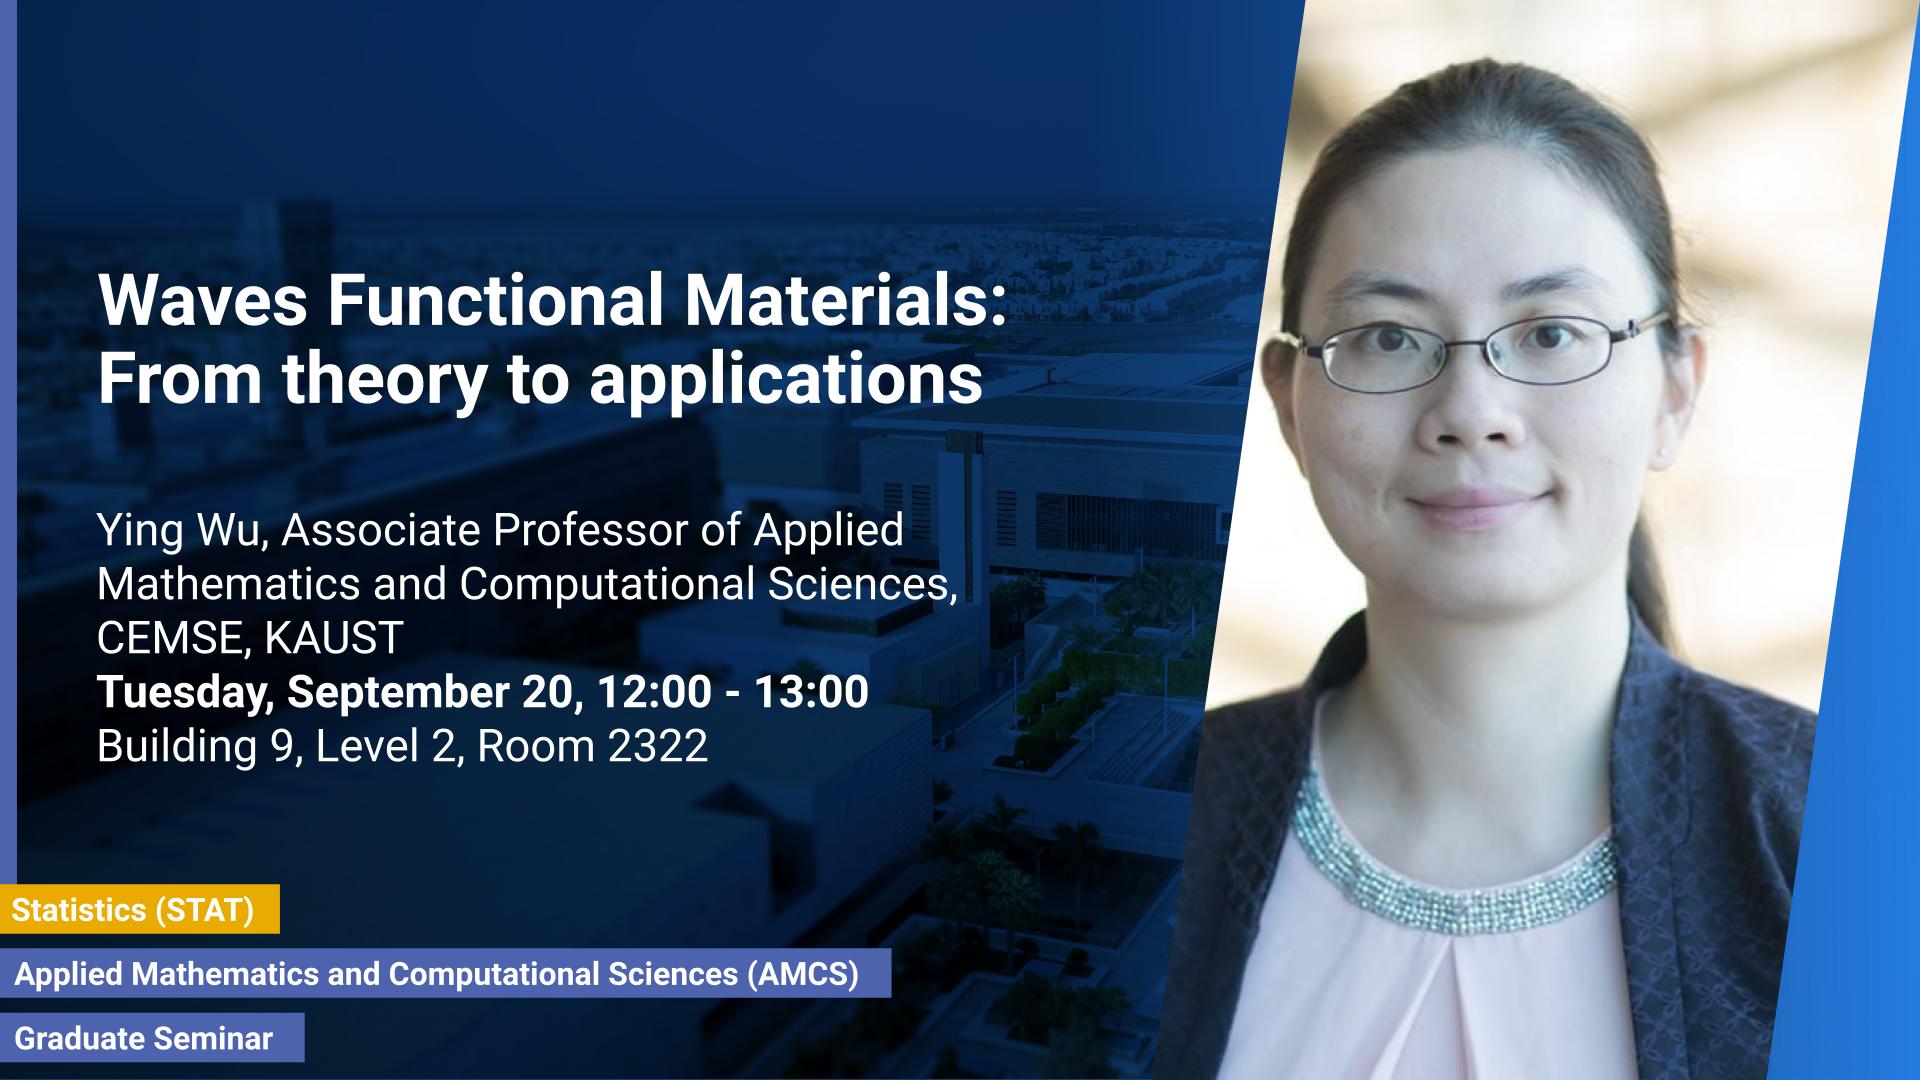 KAUST-CEMSE-AMCS-STAT-Graduate-Seminar-Waves-Functional-Materials-From-Theory-To-Applications